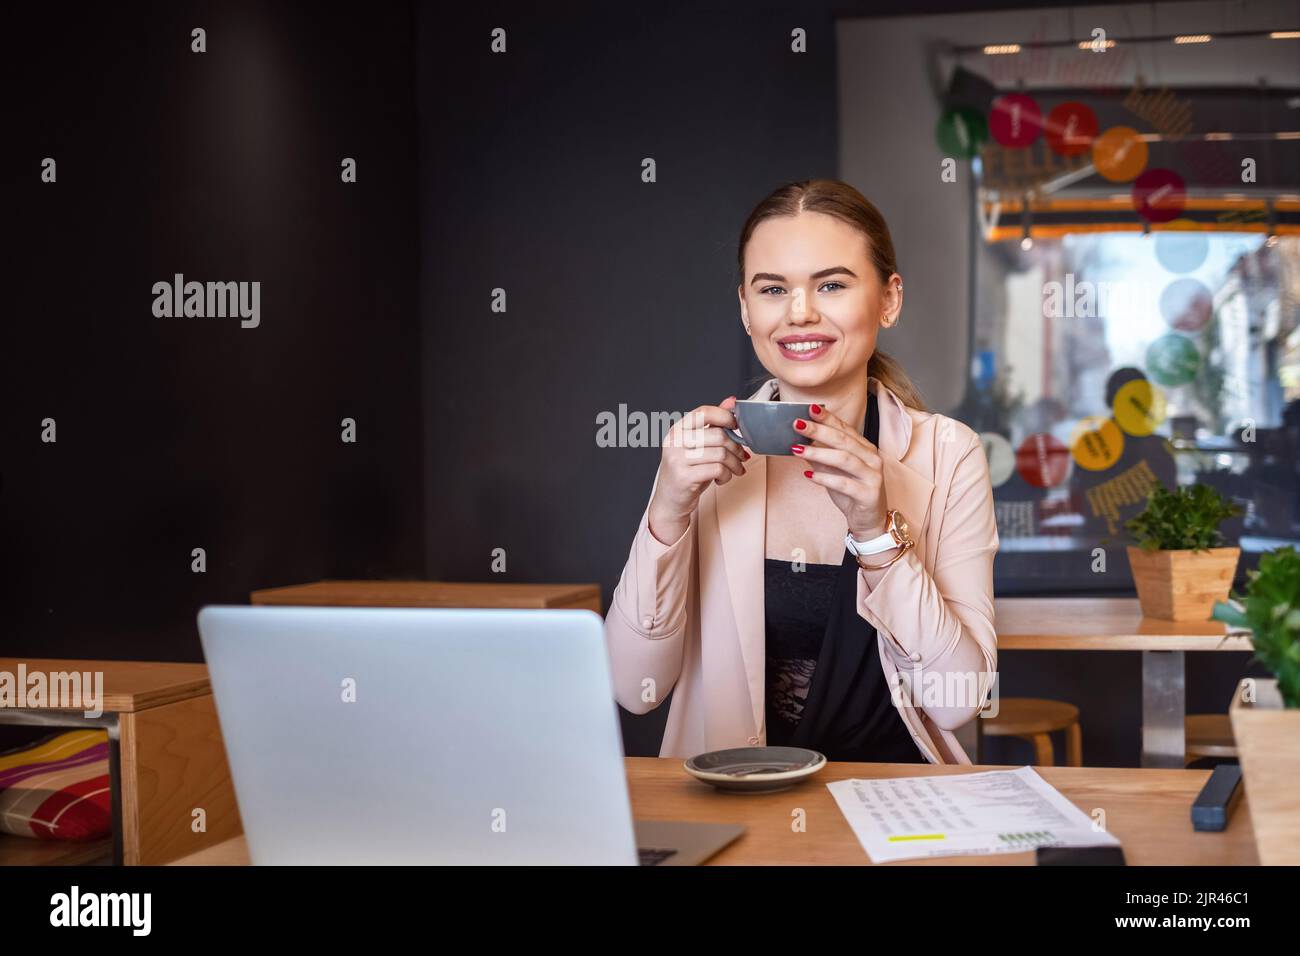 Smiling woman sitting in cafeteria holding coffee mug and working on laptop Stock Photo